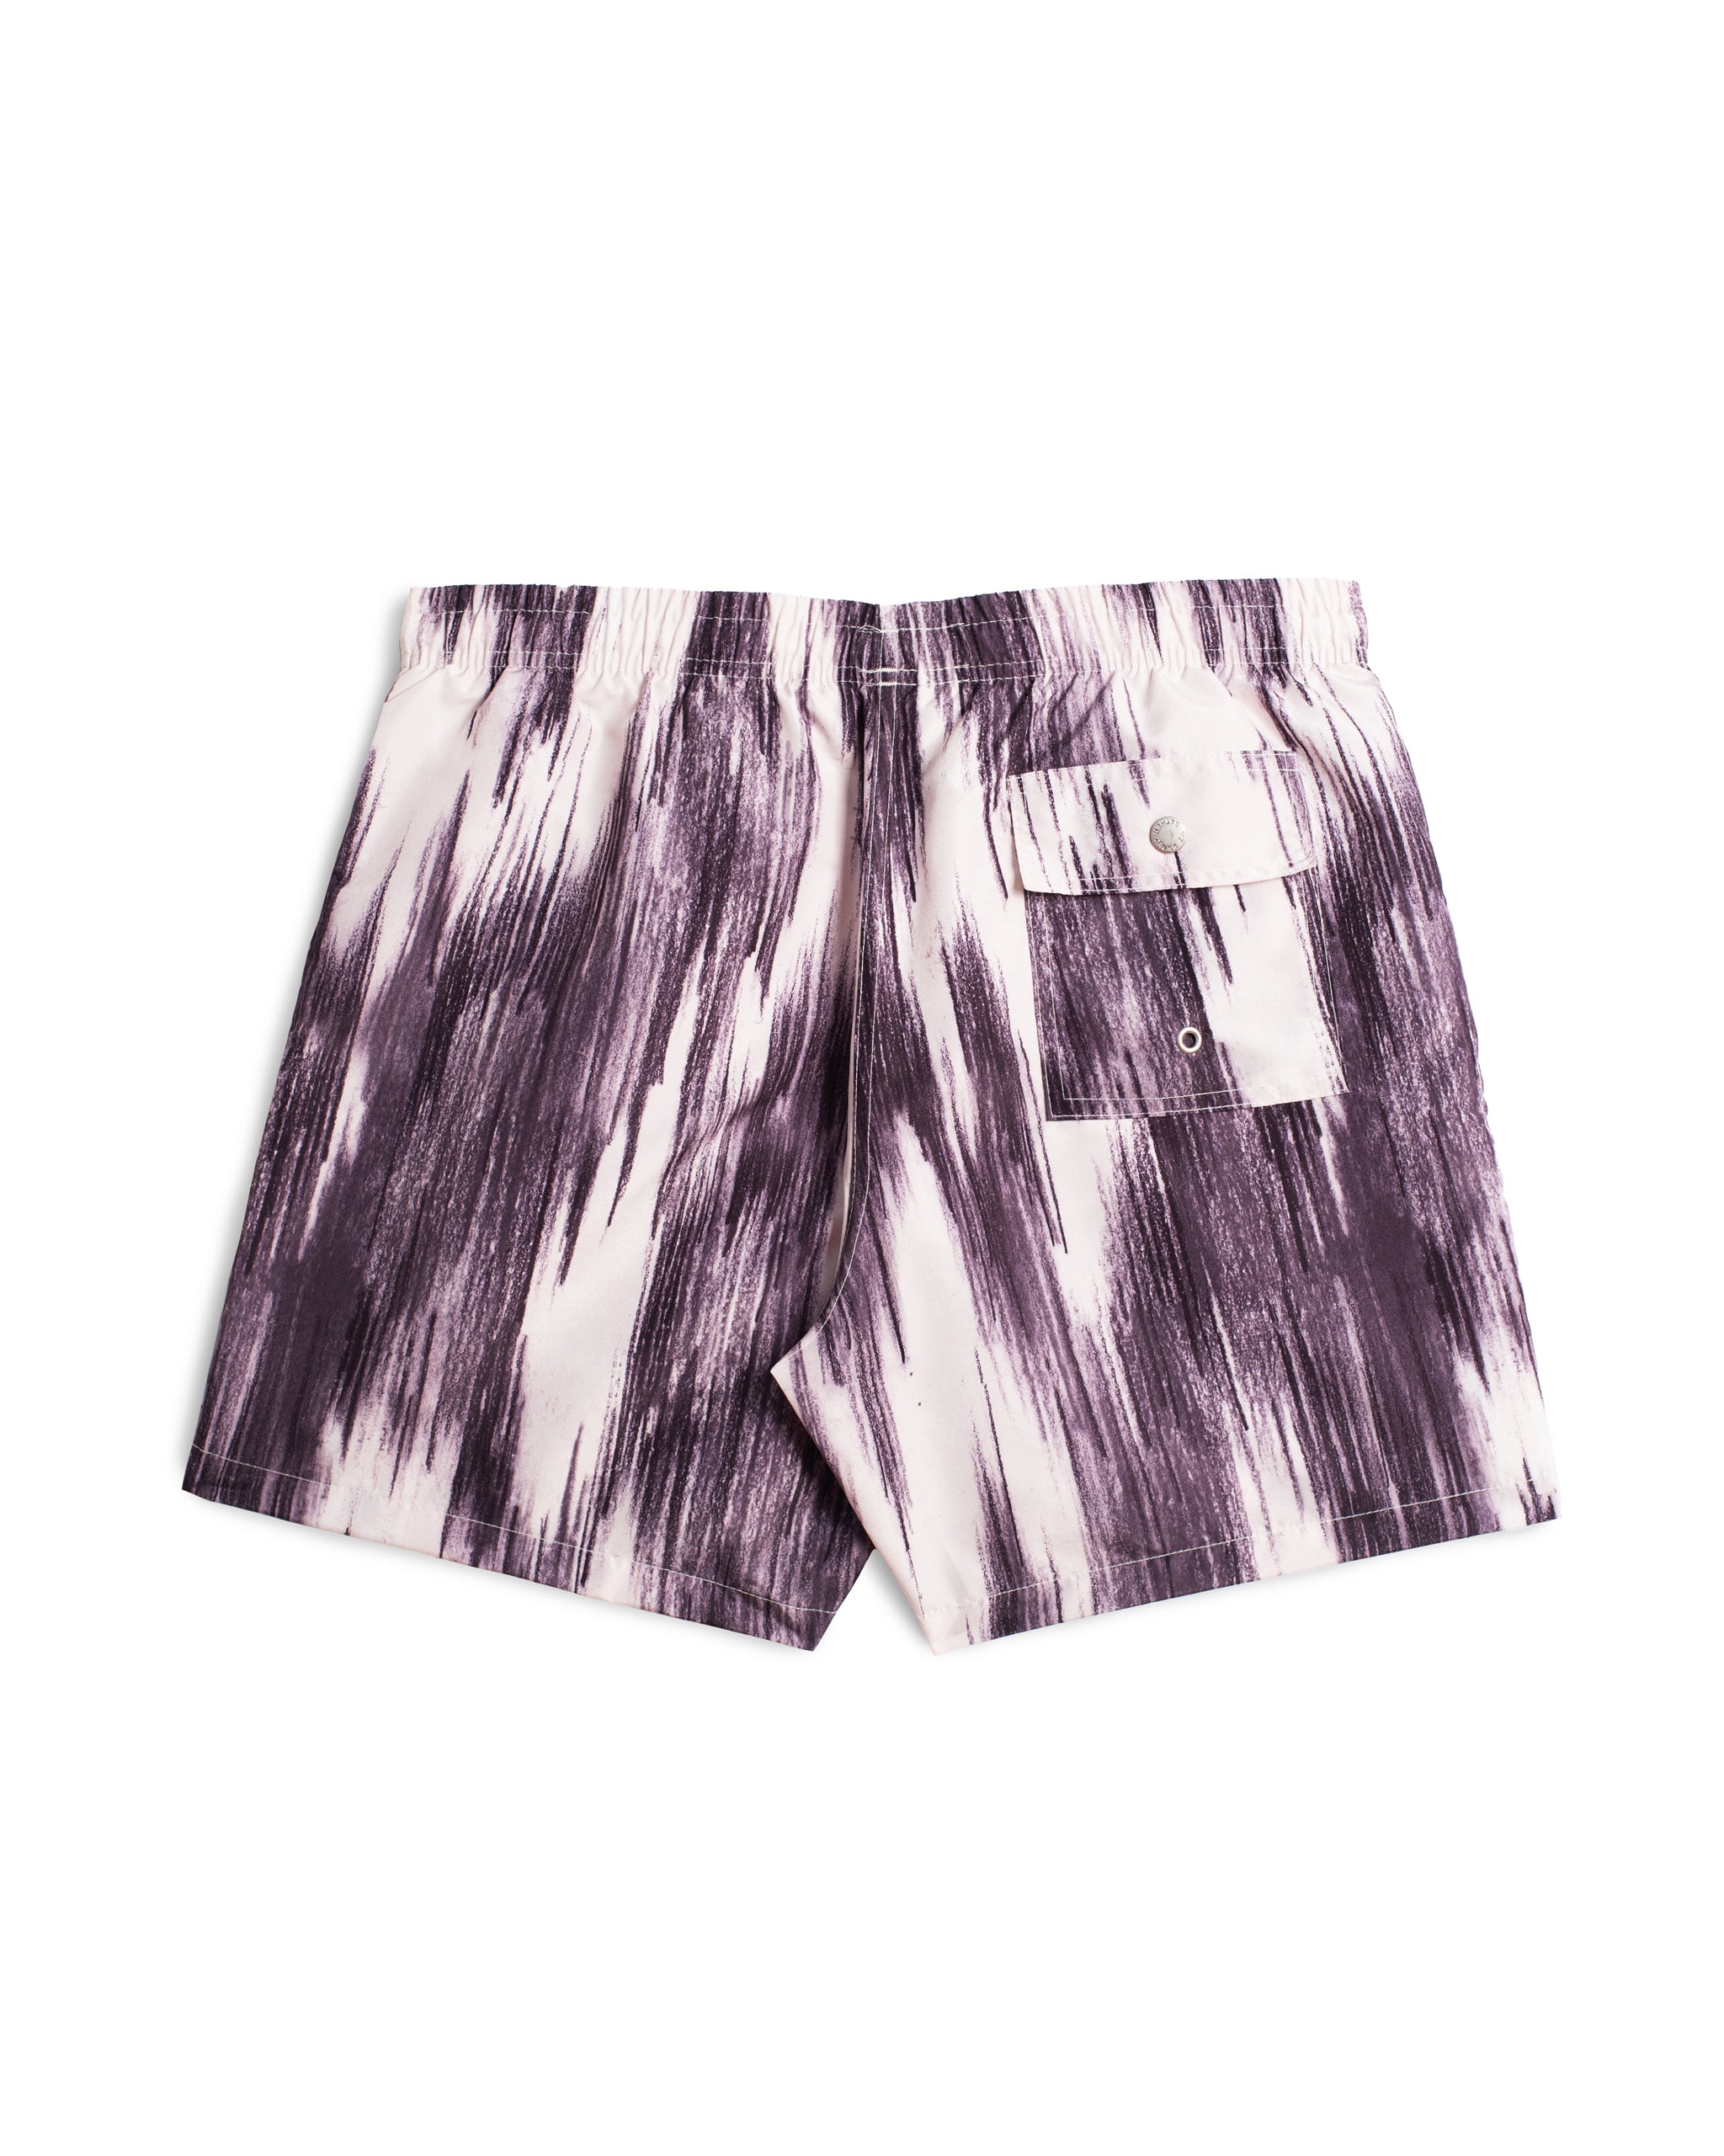 back view of purple and white Bather swim trunk with a color clashing pattern